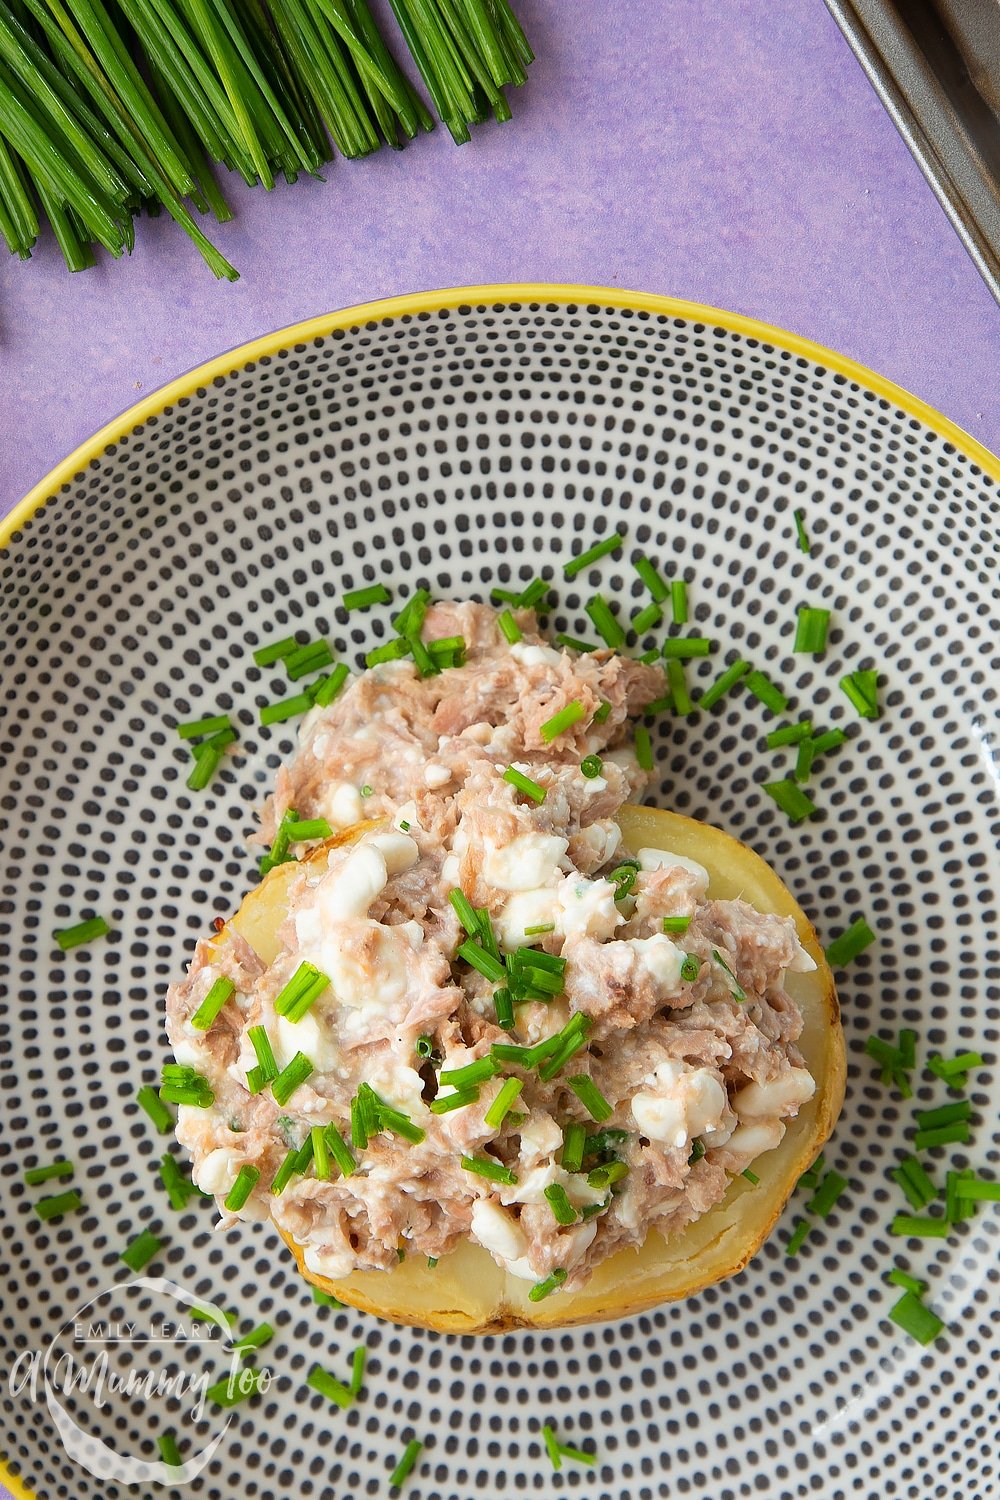 A finished serving of low-fat tuna cheese jacket potato on a plate.